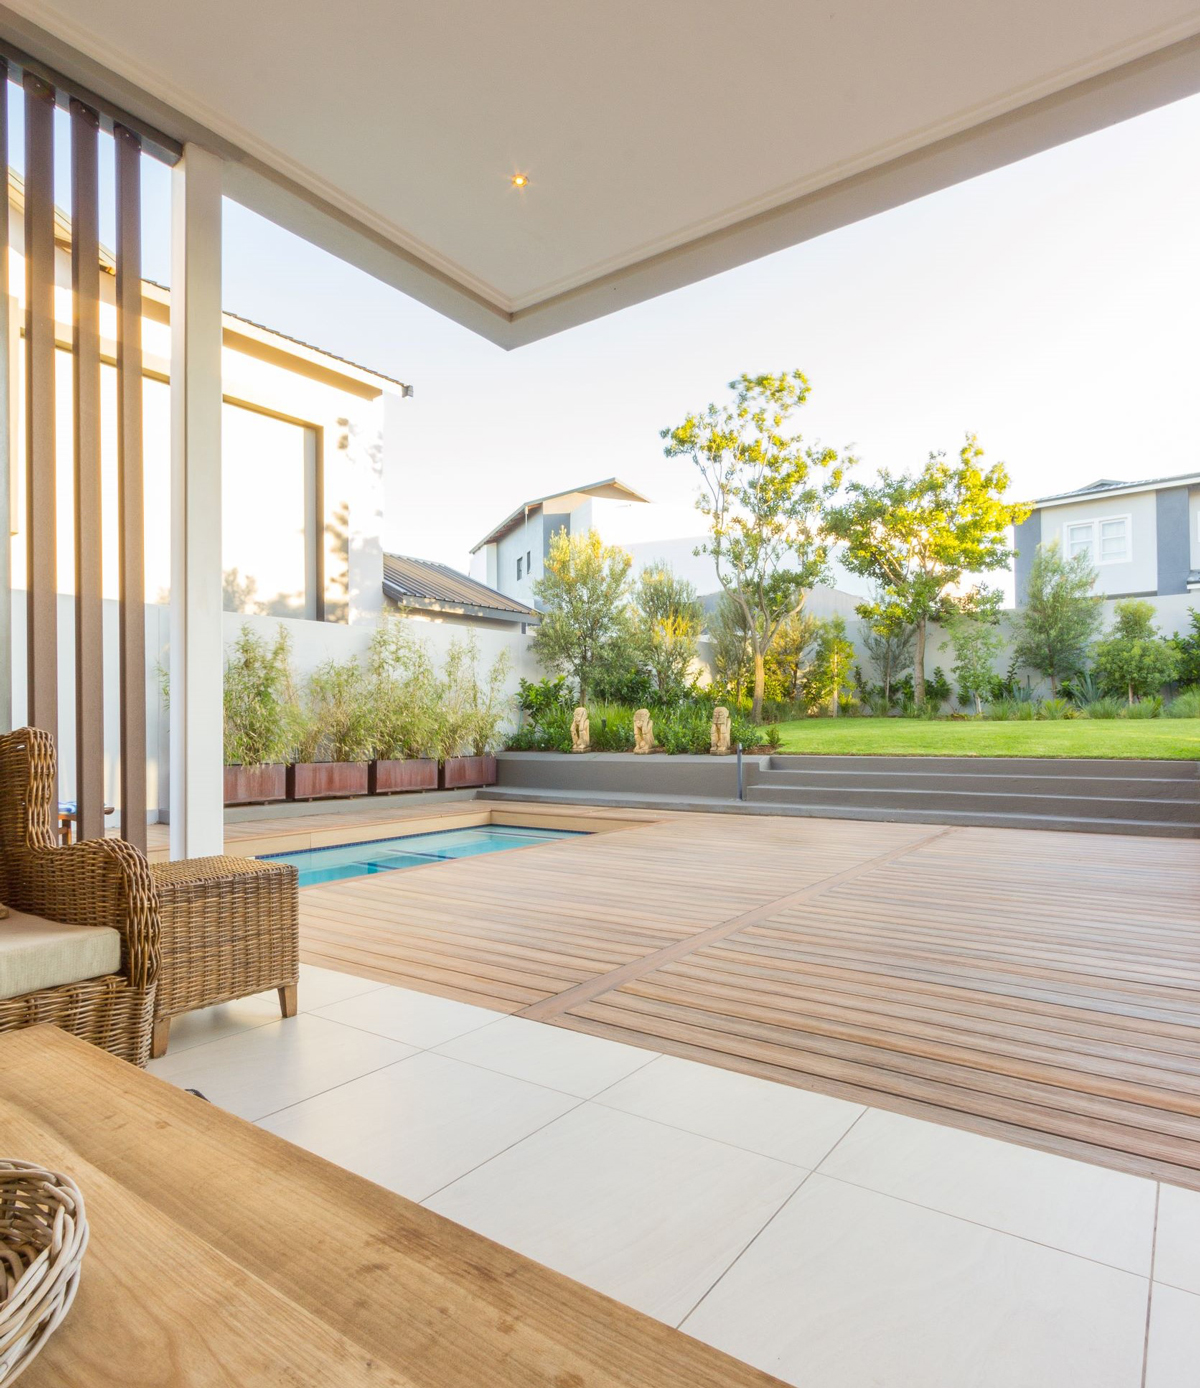 Outdoor living space with light colored composite decking adjacent to a pool with green trees in the background.